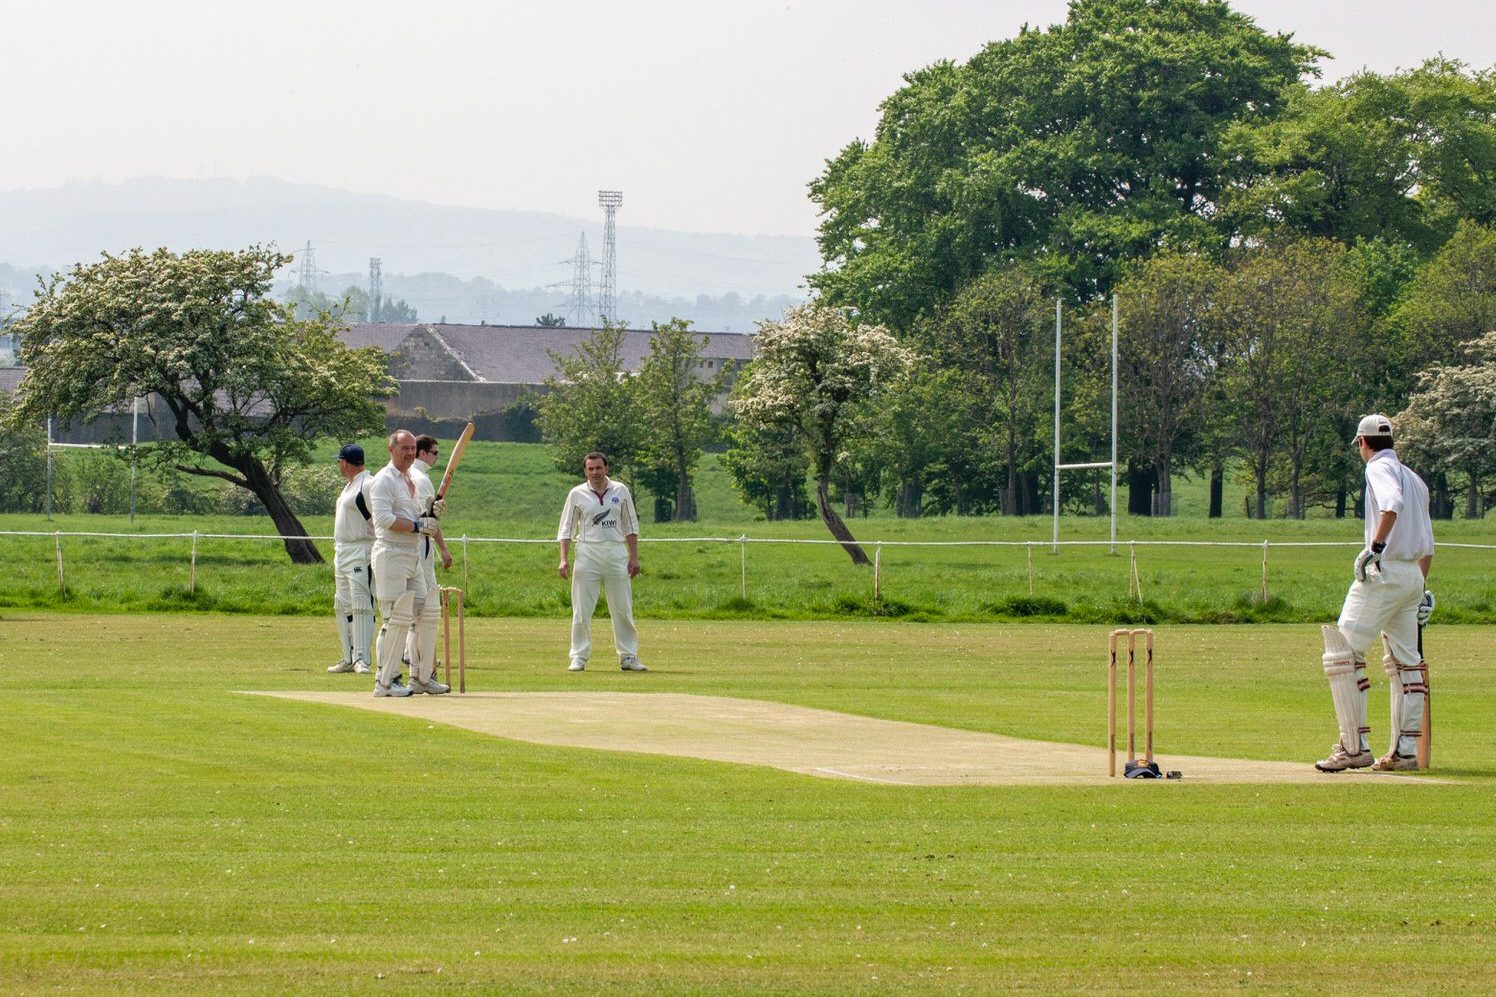 TWO CRICKET CLUBS IN PHOENIX PARK NEAR THE WELLINGTON MONUMENT 019